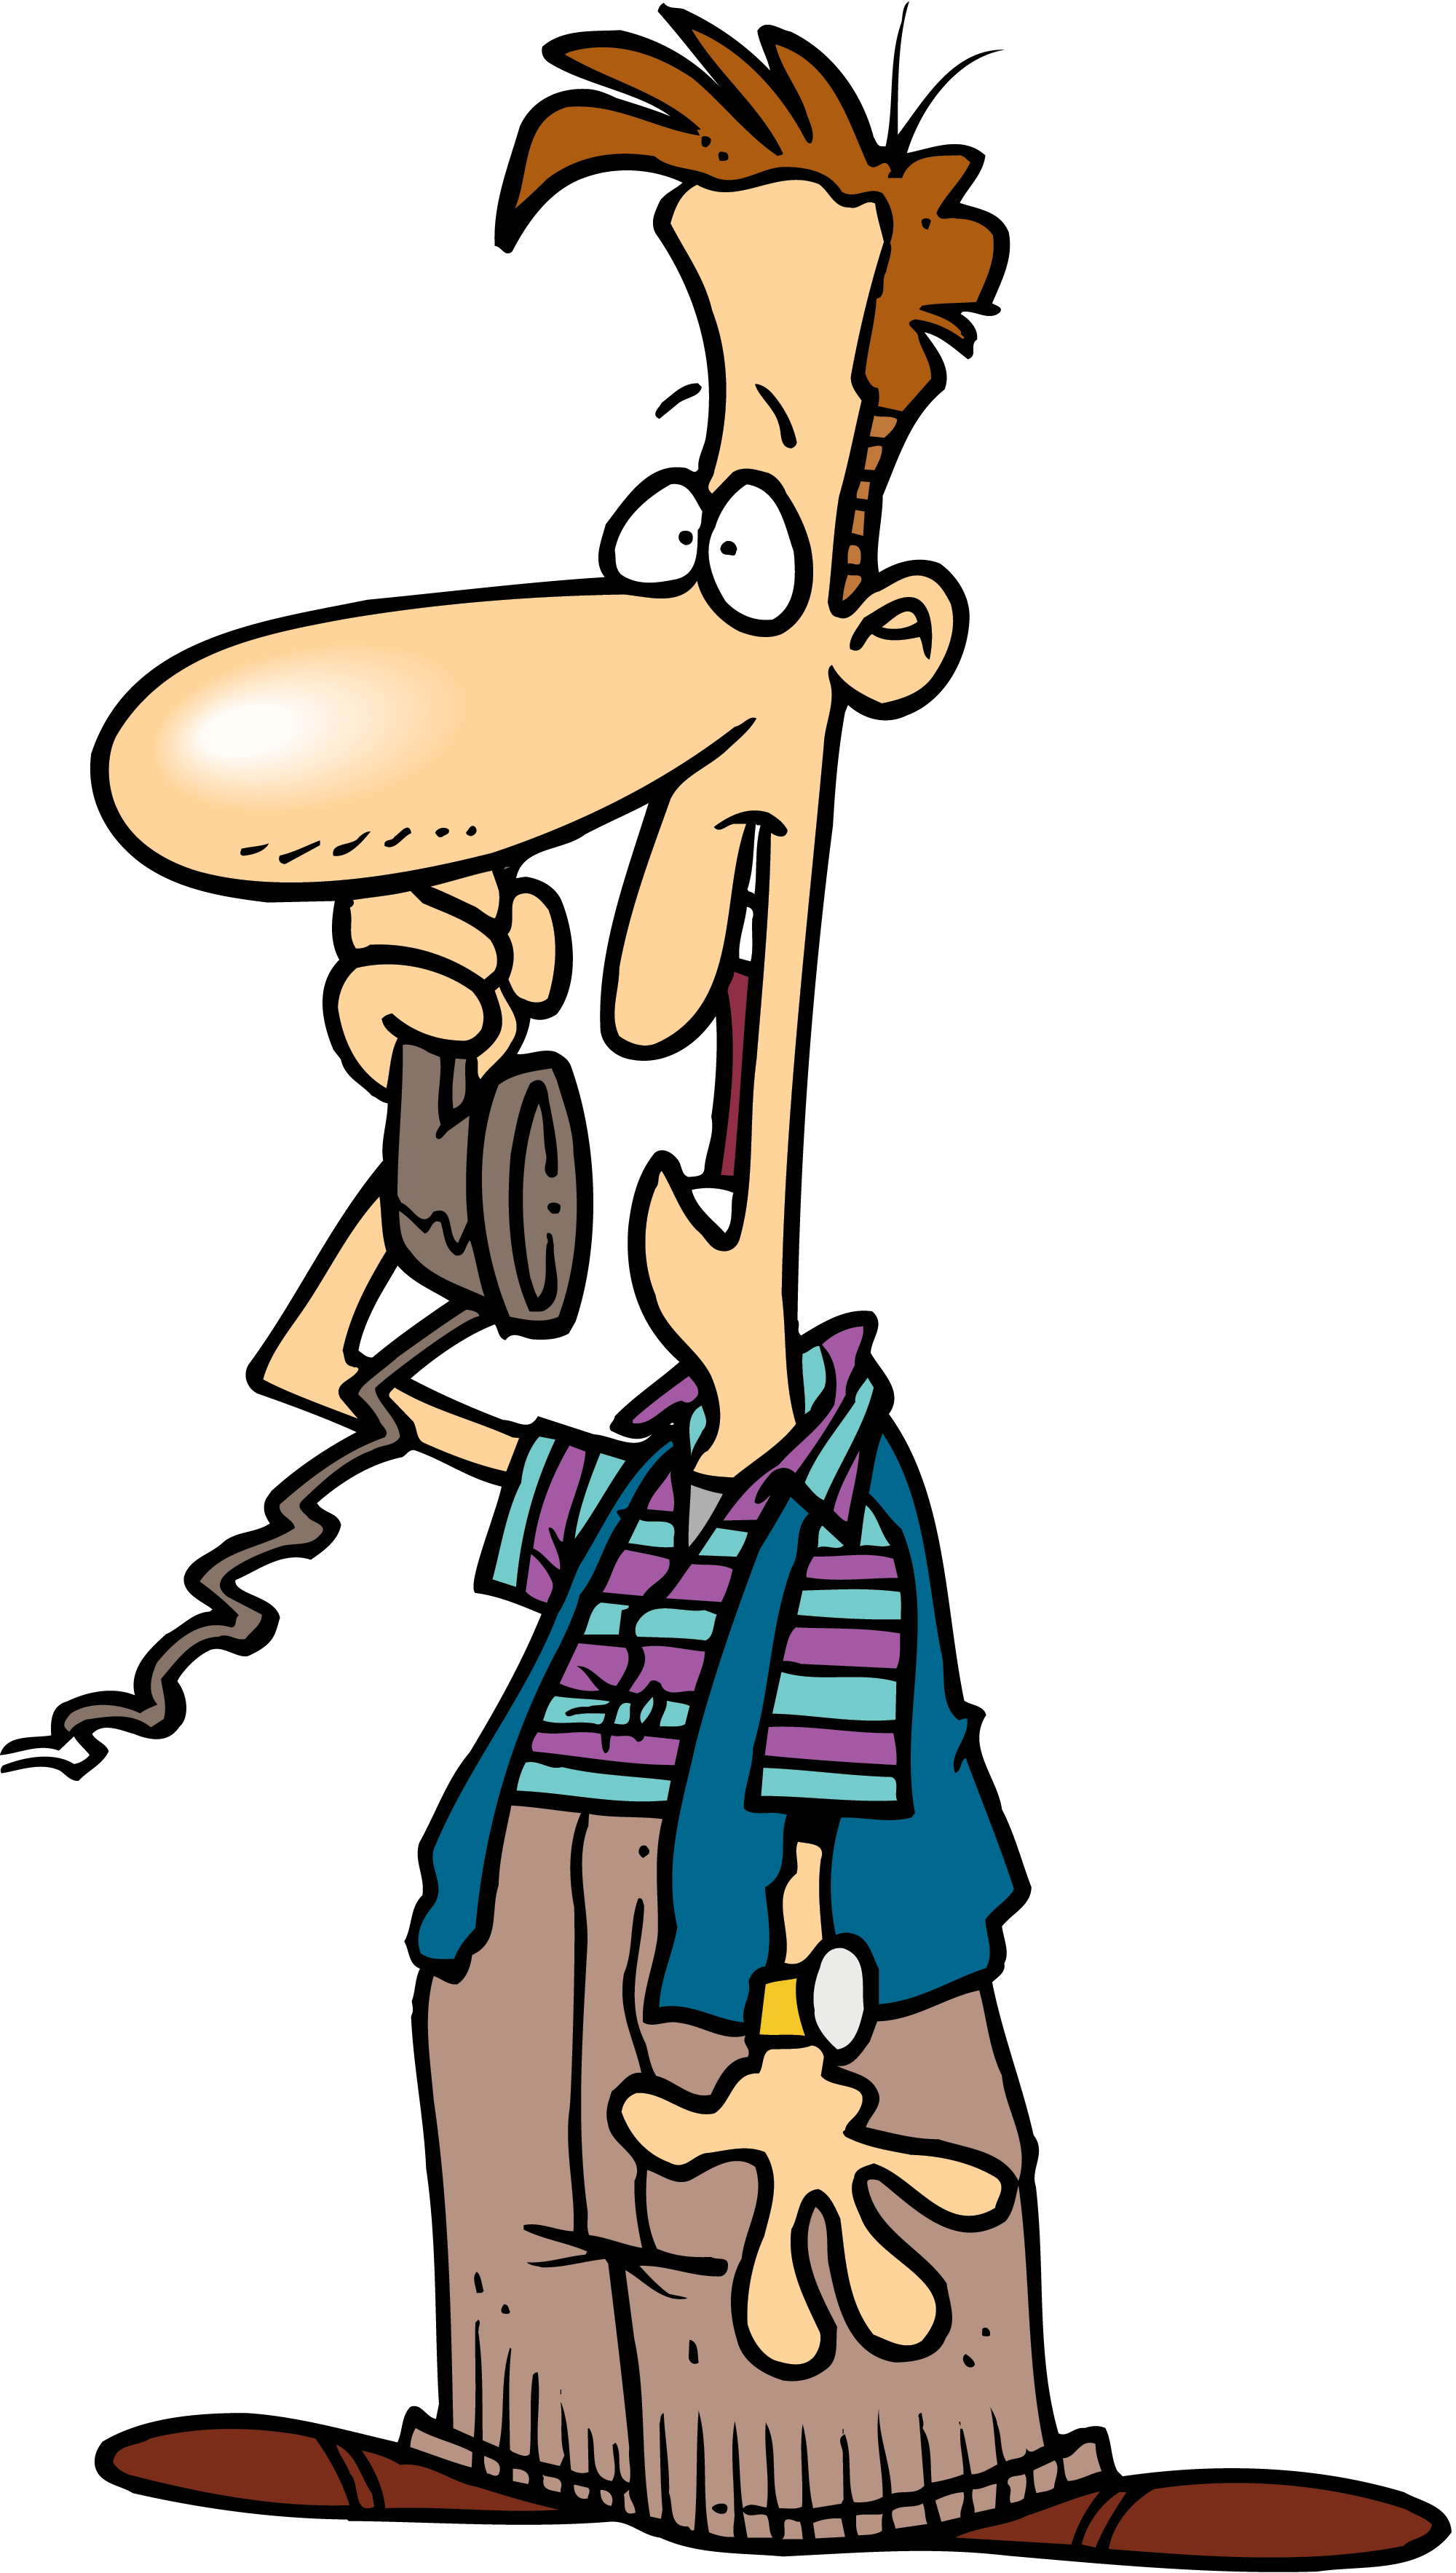 Telephone clipart caller. Things to ask unsolicited